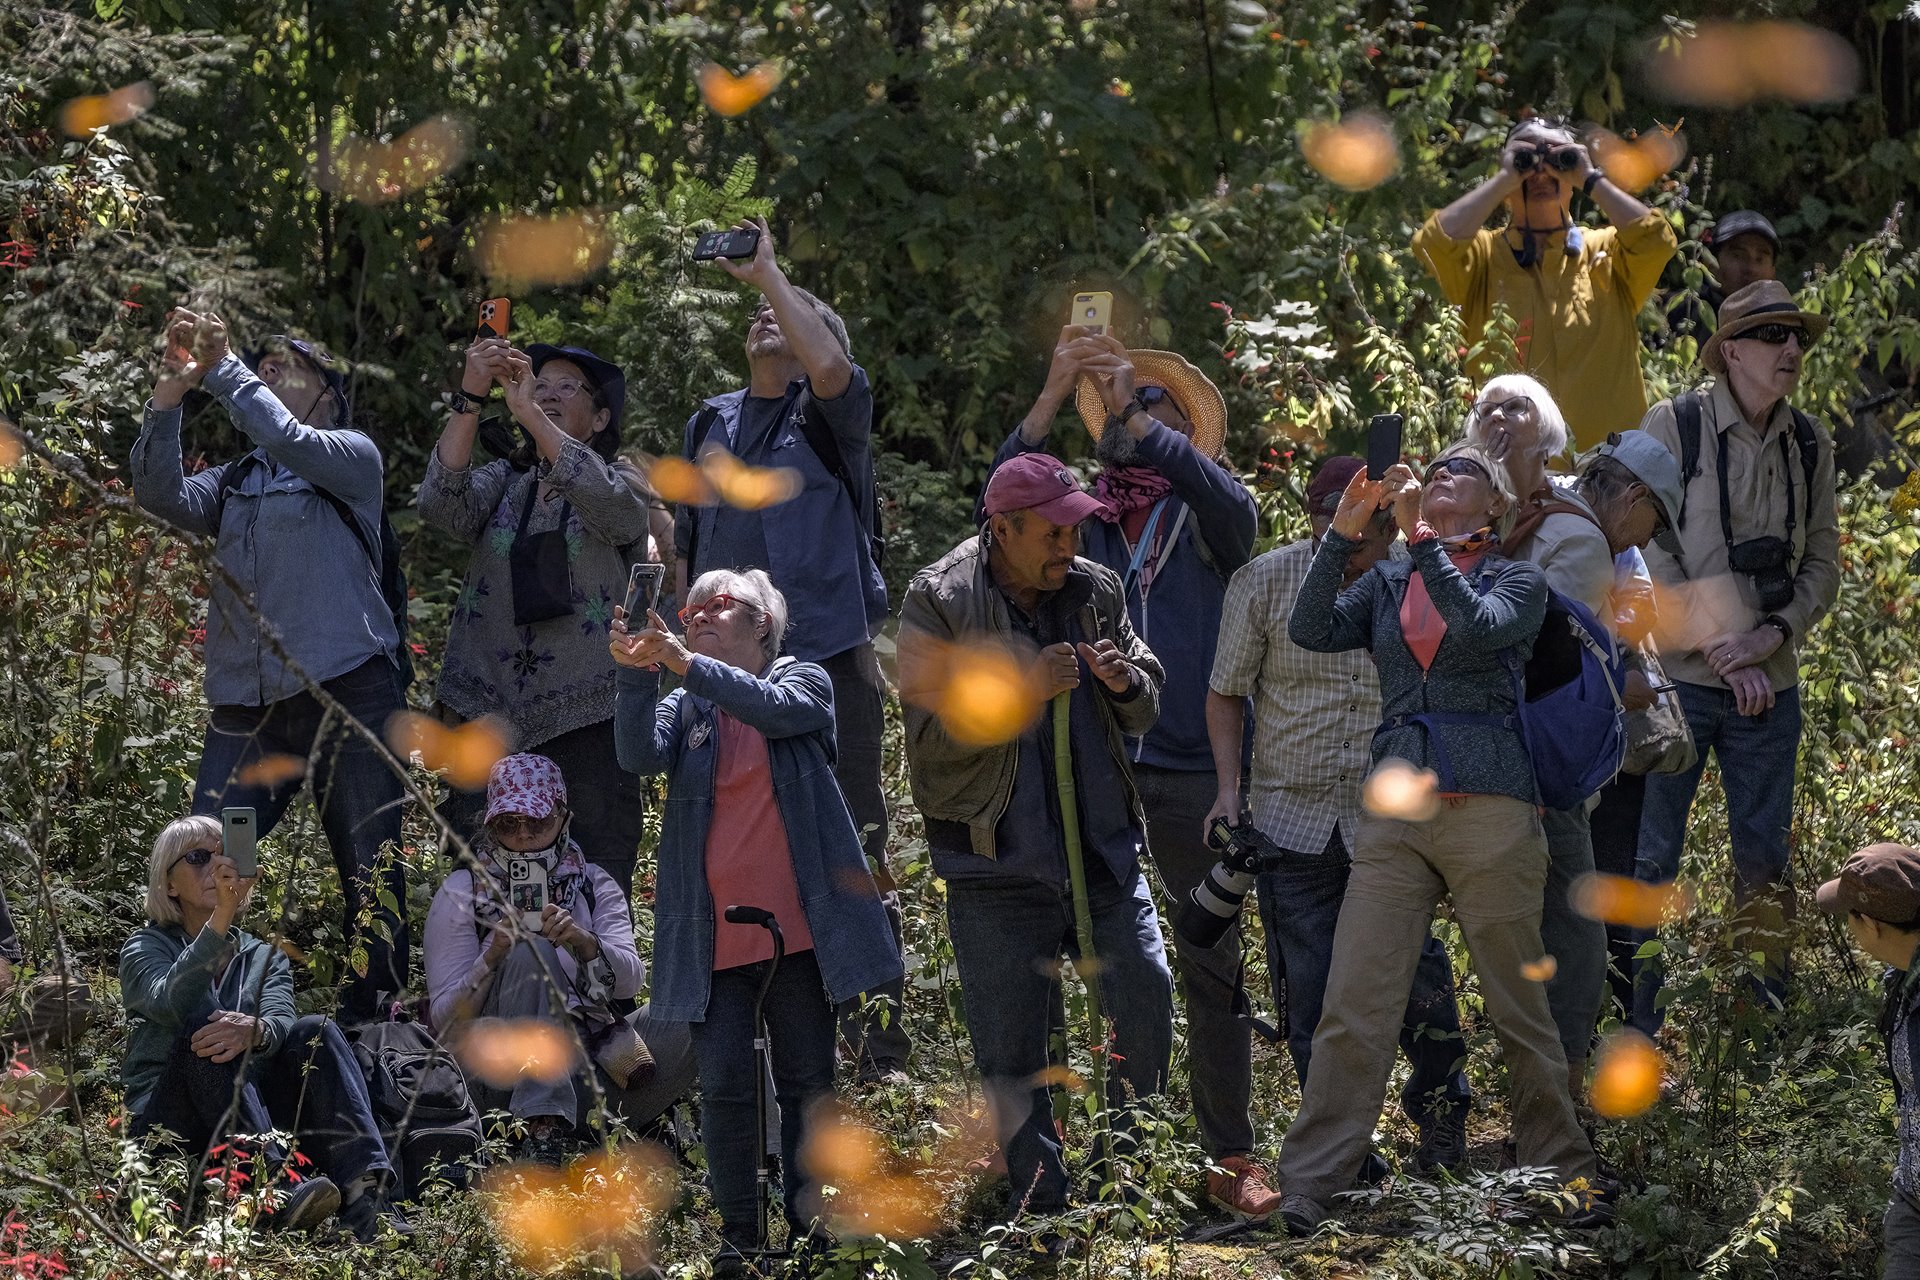 Visitors observe monarch butterflies in El Rosario Monarch Butterfly Sanctuary, Michoacán, Mexico, in a region where income from tourism allows &nbsp;local communities to restore and protect areas once used for agriculture or logging.&nbsp;